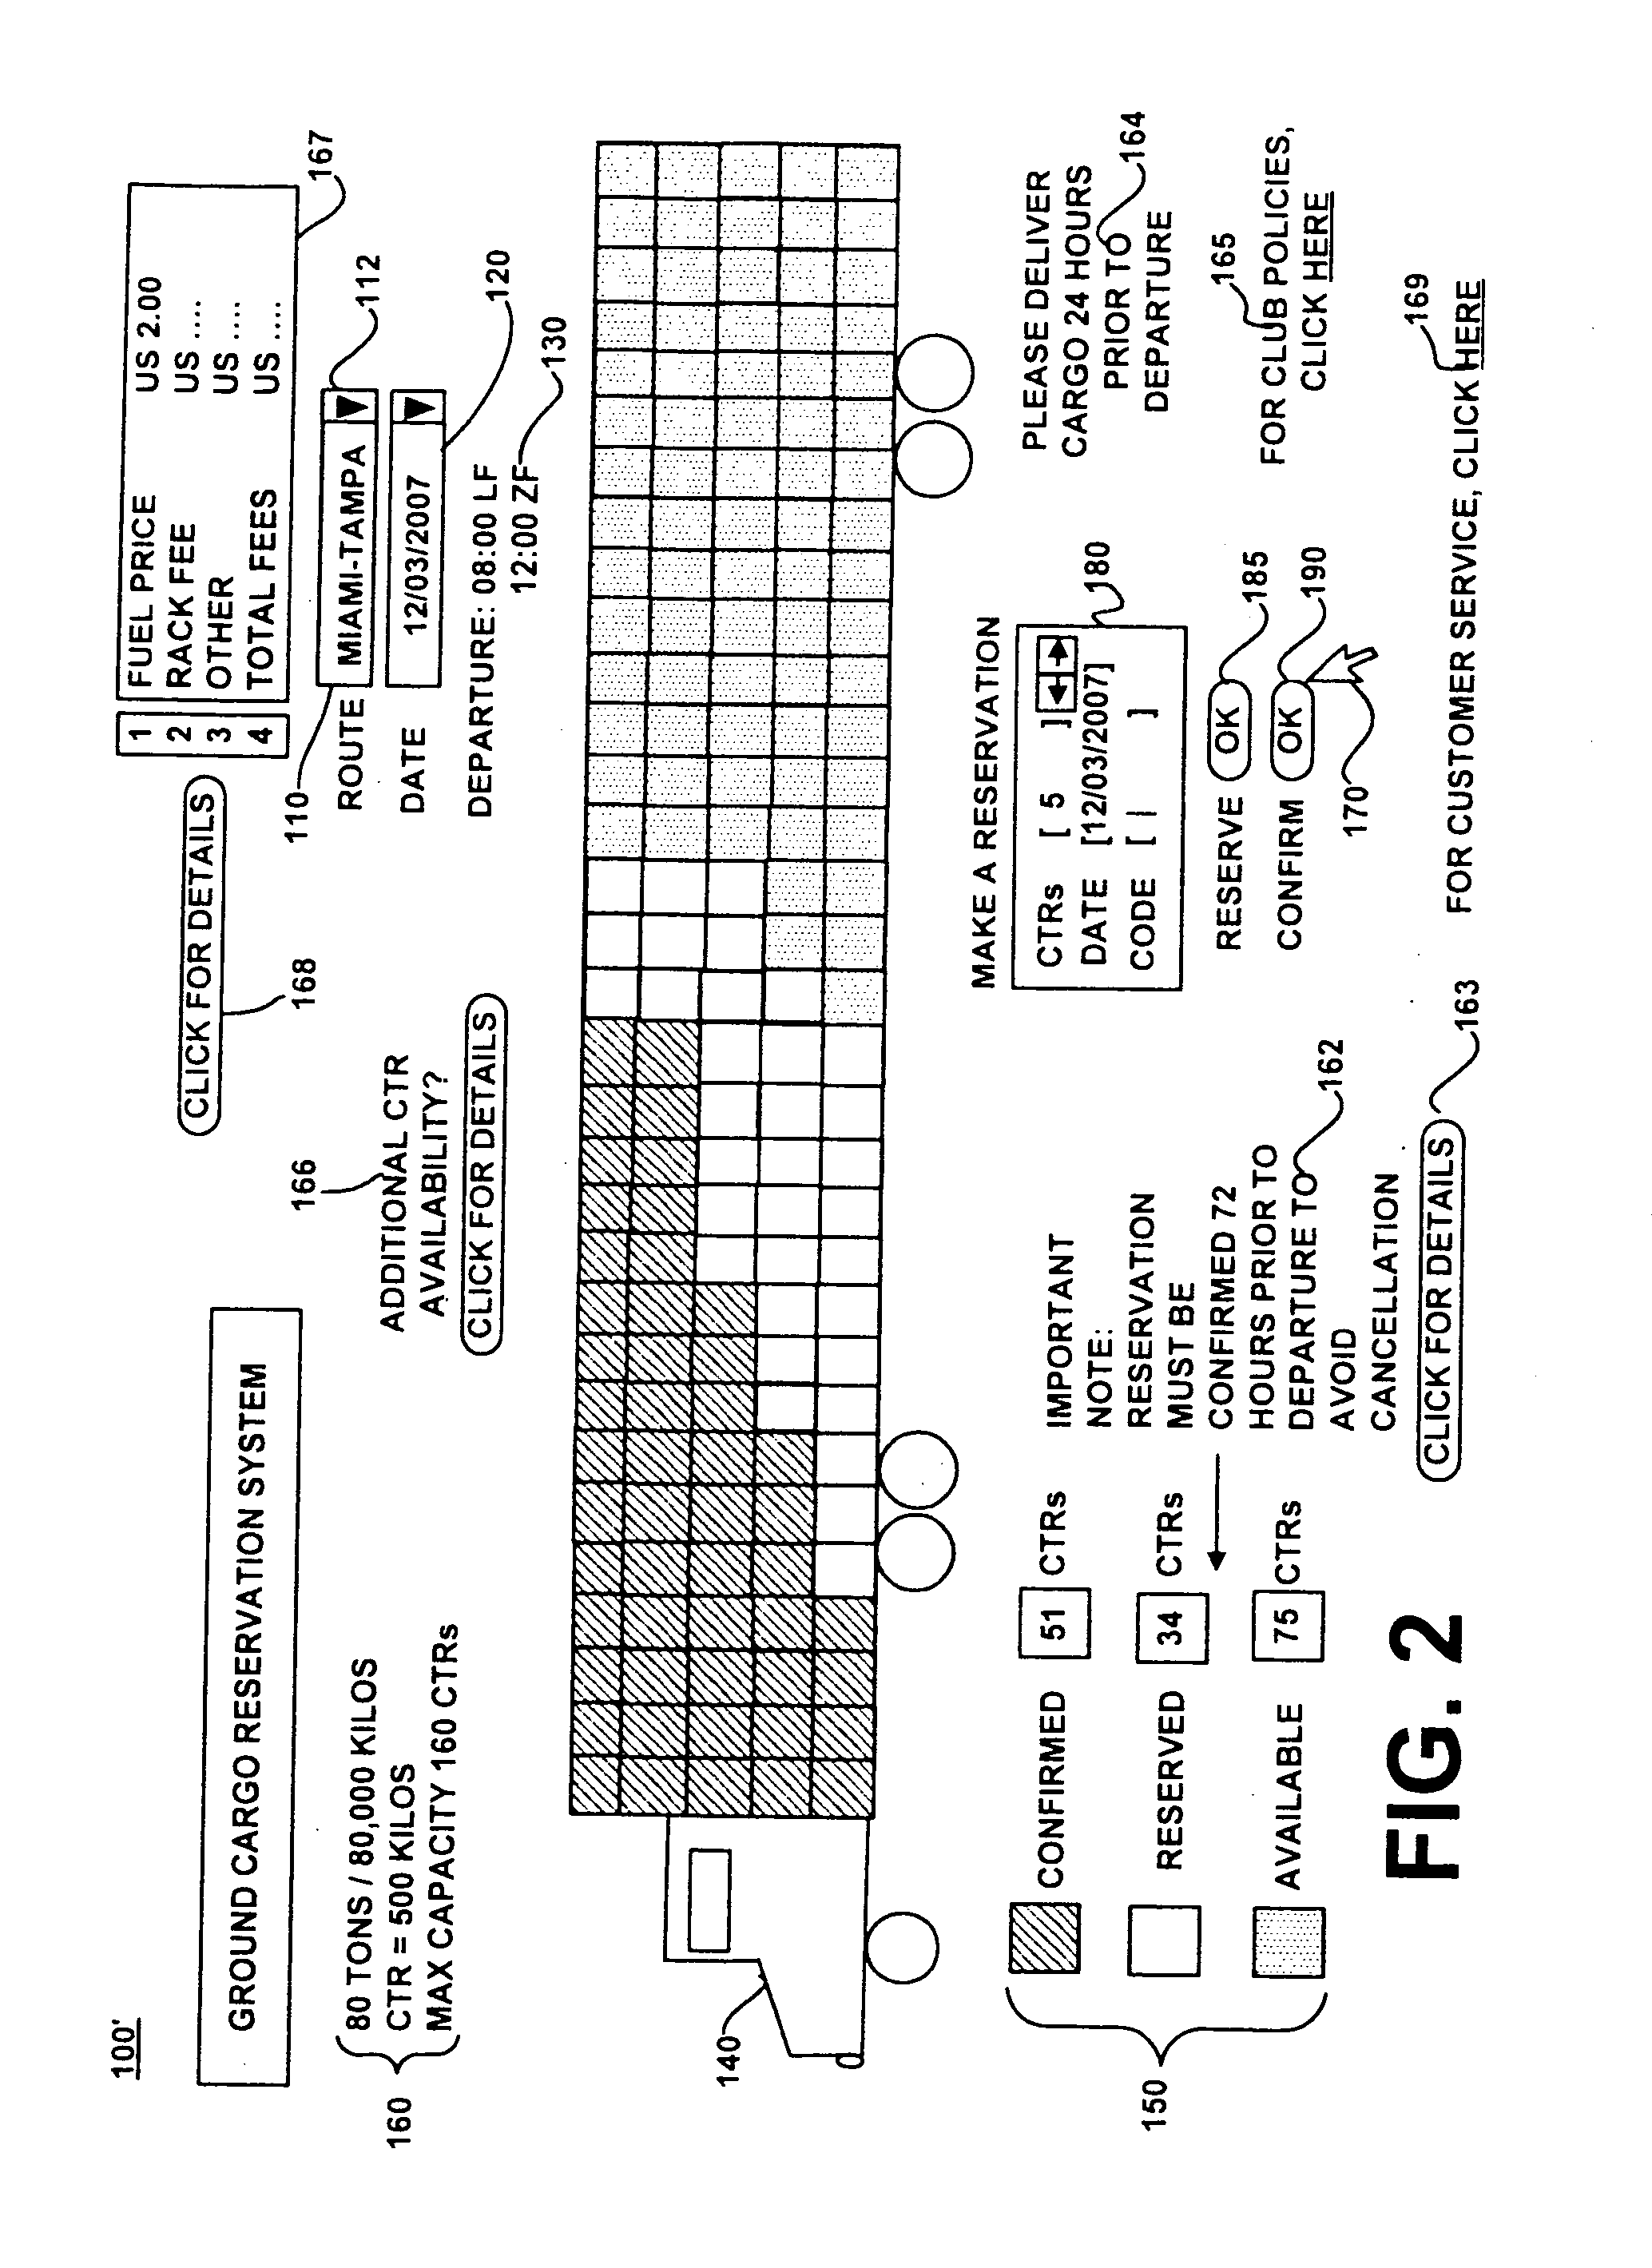 Cargo reservation system and method